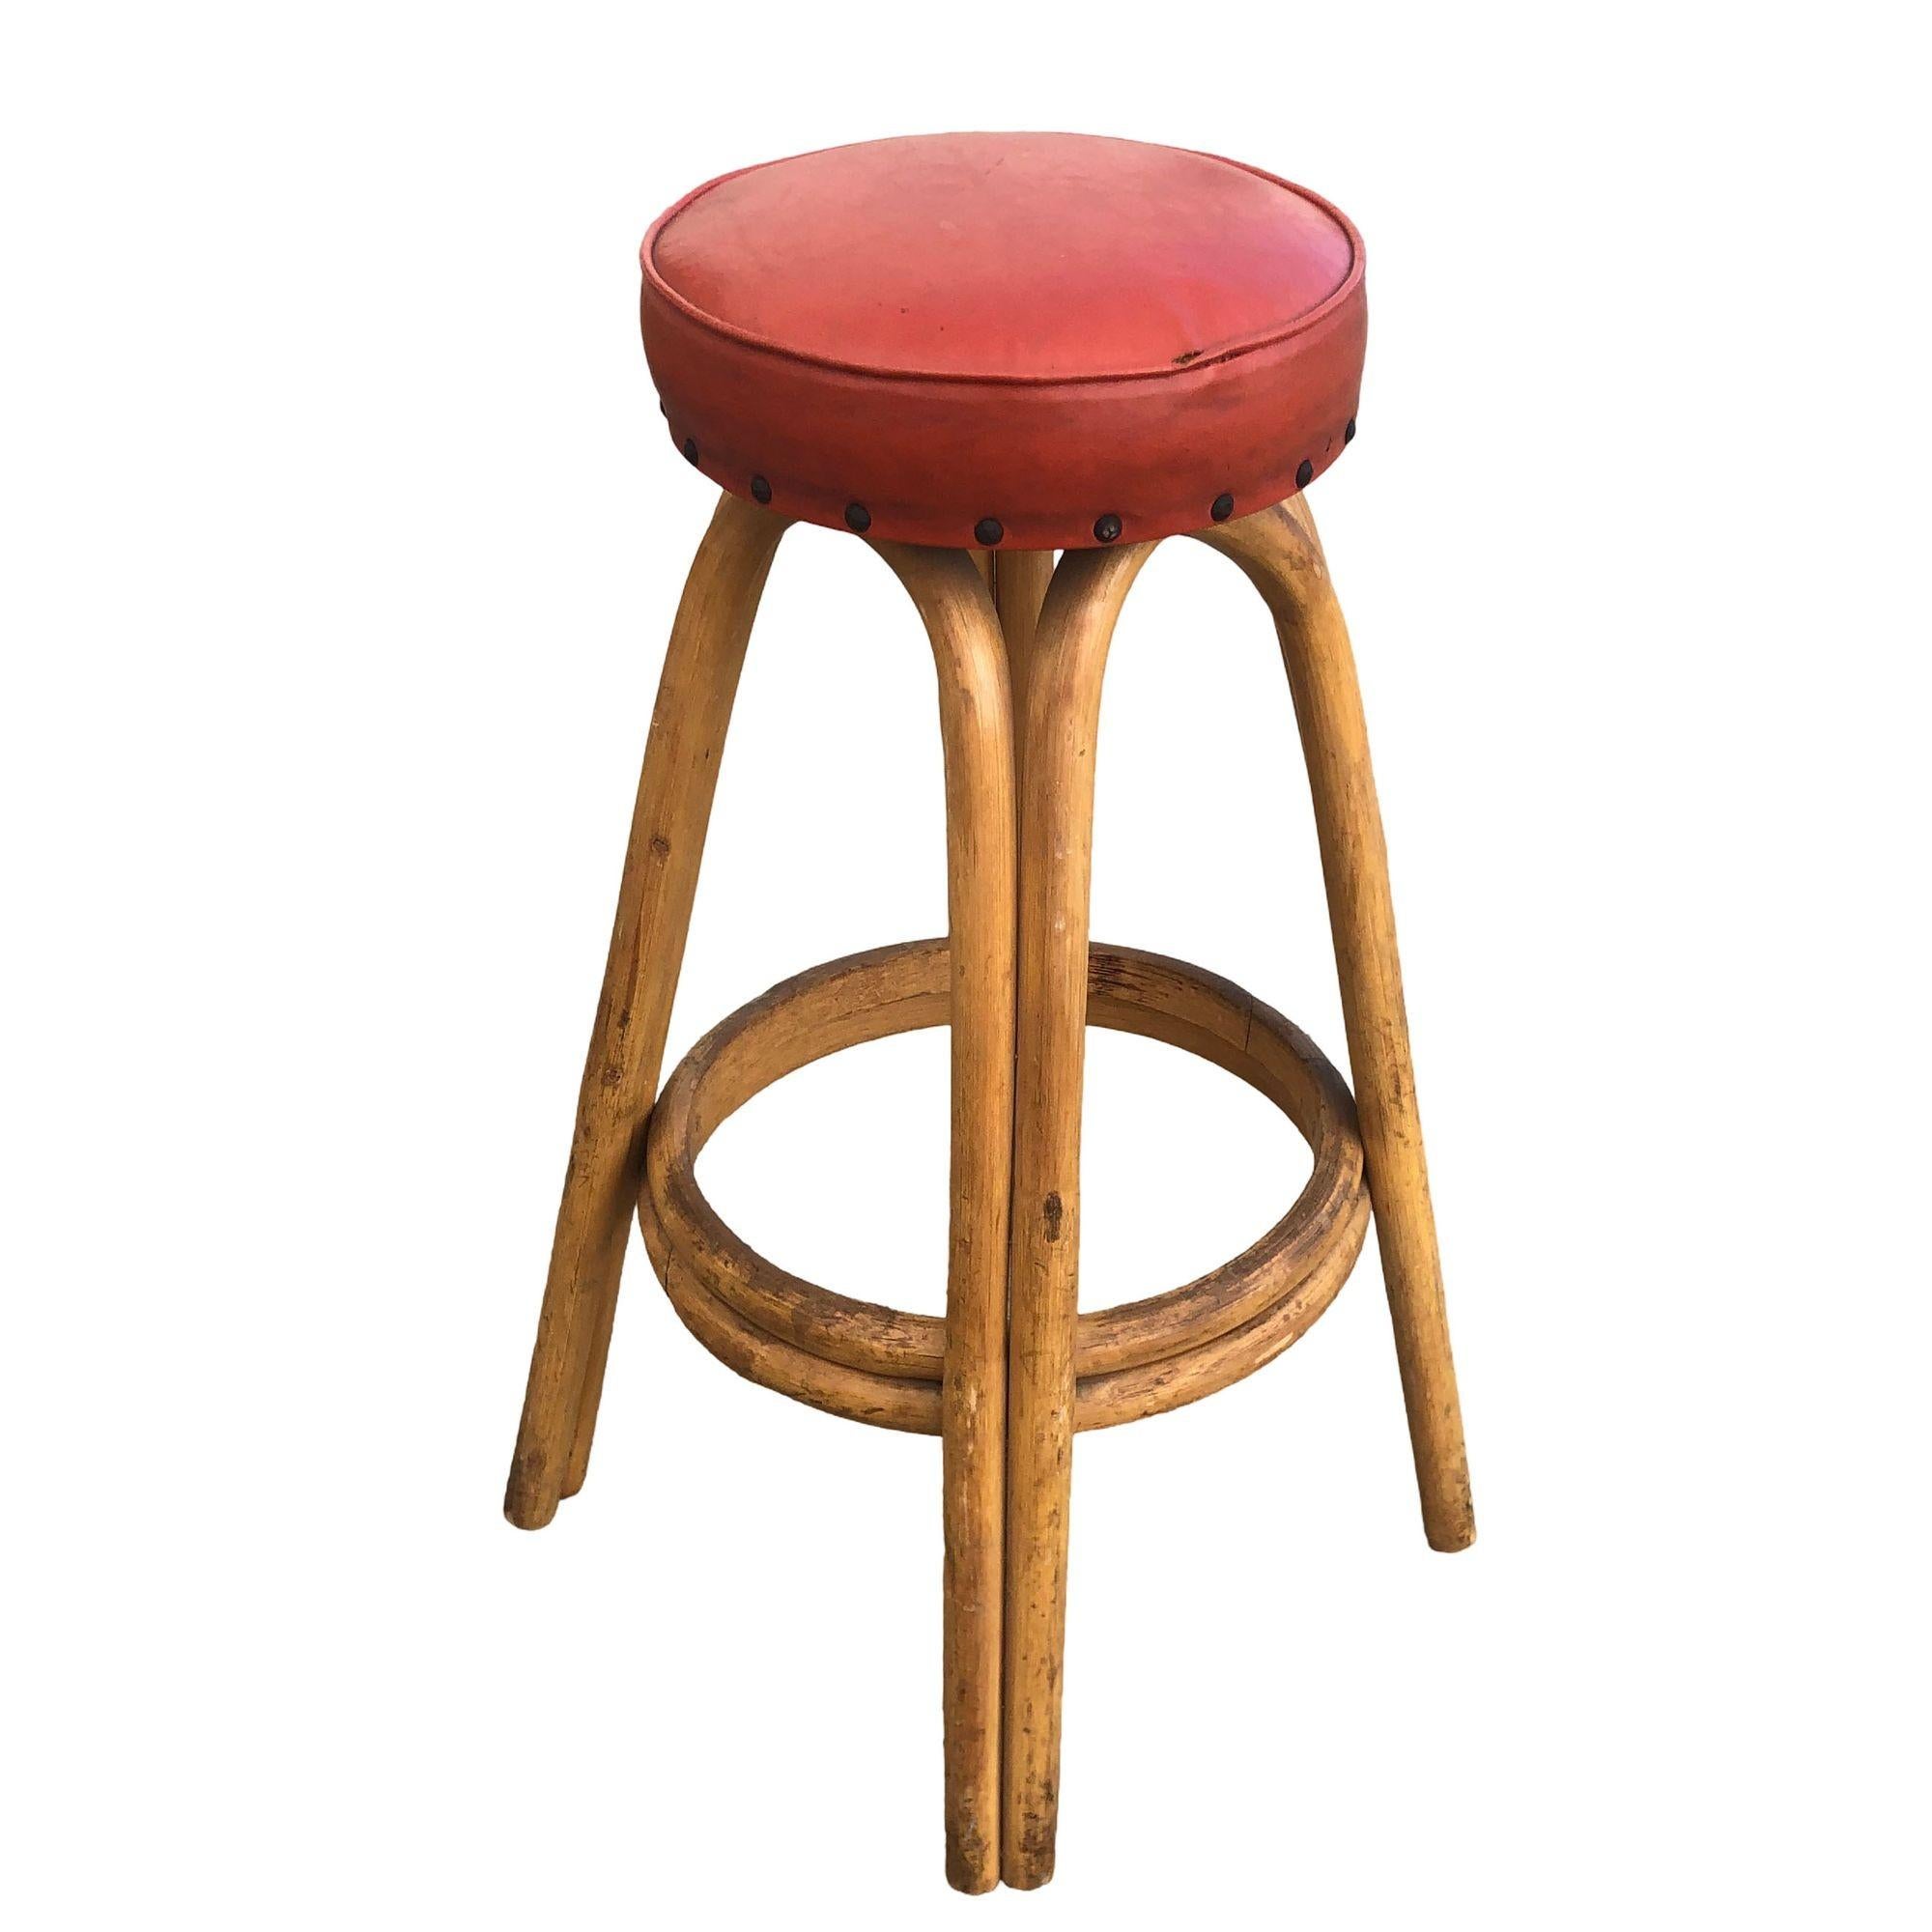 Restored arched Rattan Bar Stools w/ Studded Nailhead Red Seats, Set of 5 In Excellent Condition For Sale In Van Nuys, CA